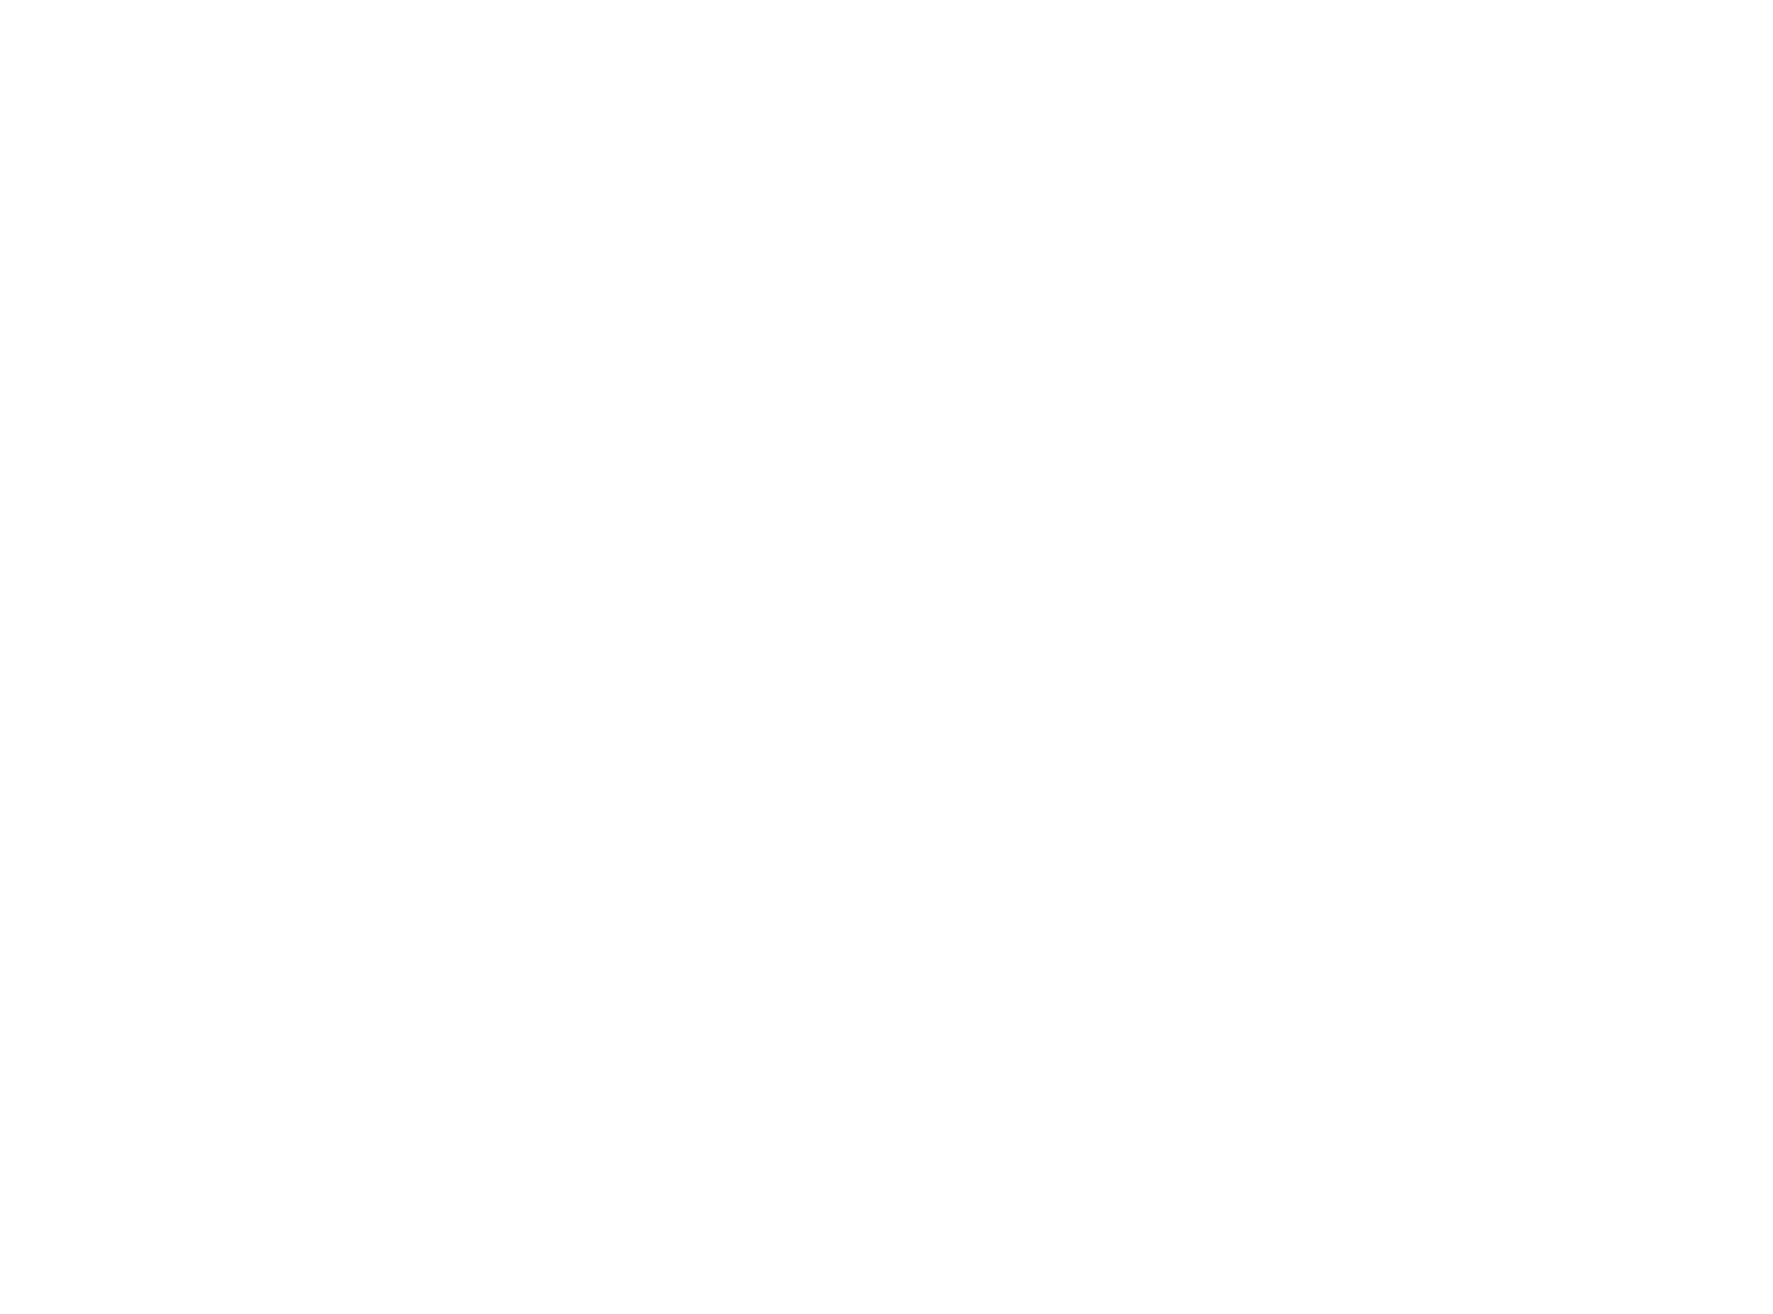 http://Burnt%20Orange%20logo%20with%20text%20All%20Day%20&%20Late%20Night%20Wood-Fired%20Flavours%20&%20Well-Made%20Drinks